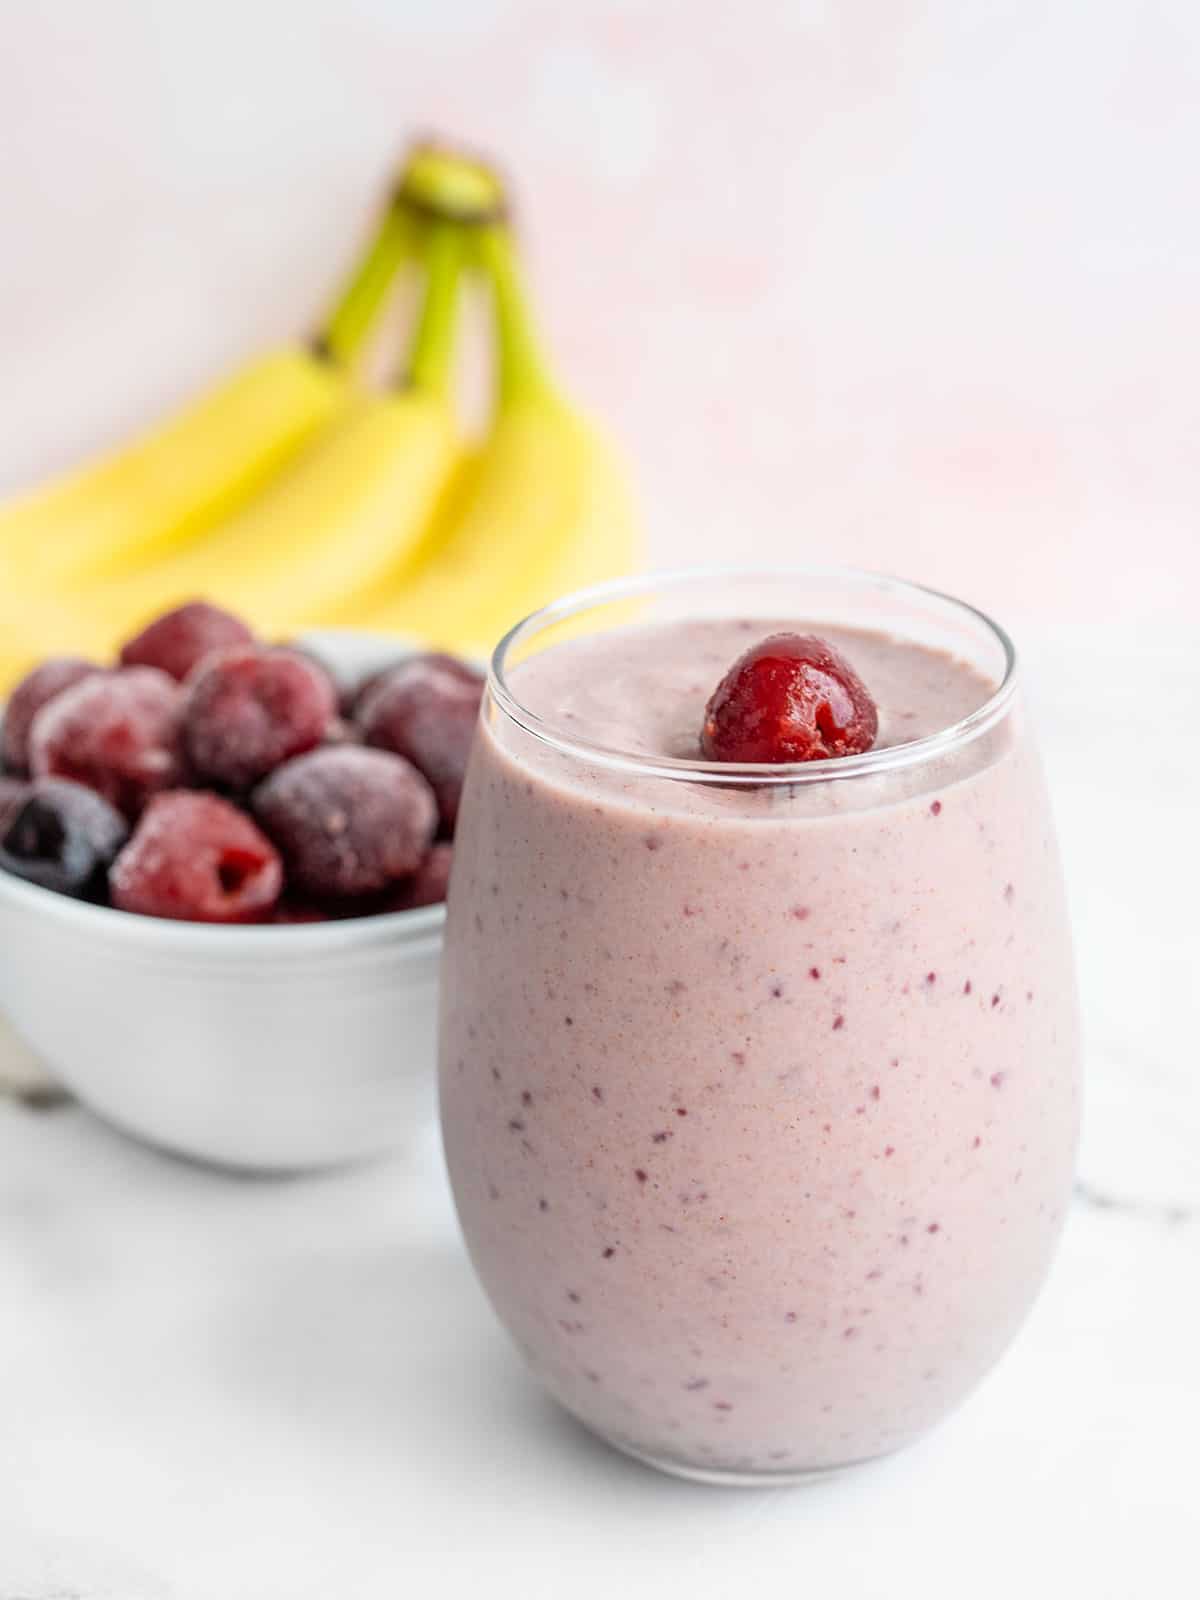 Cherry almond smoothie in a short glass with bananas and a bowl of frozen cherries behind it